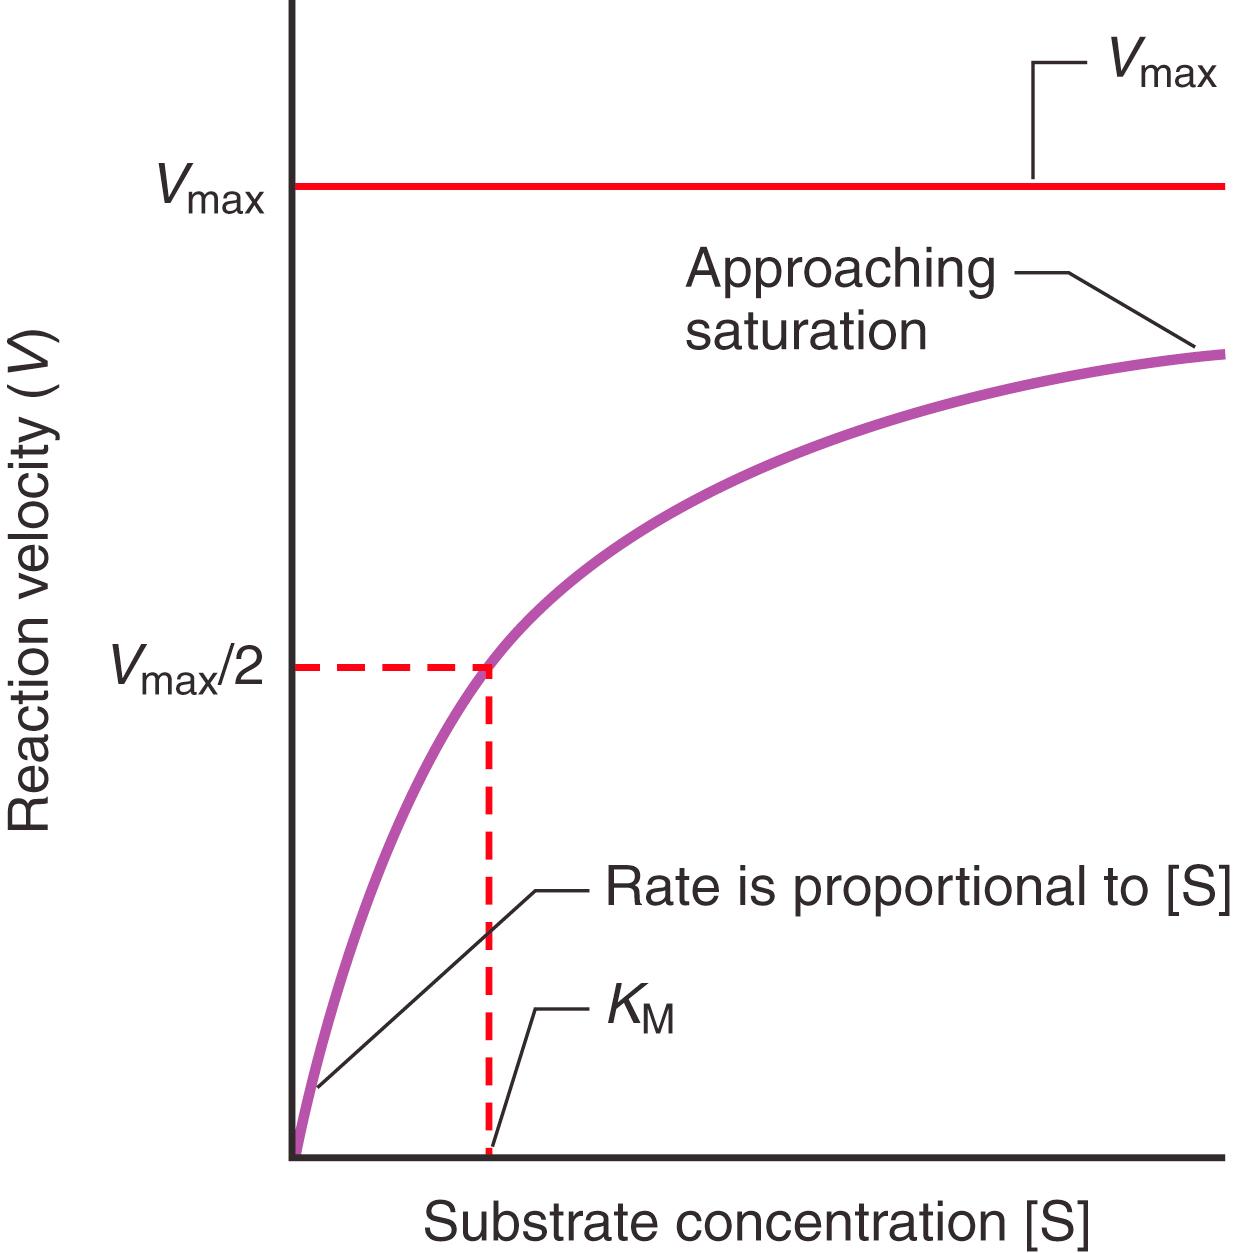 Figure 21.4, The effect of substrate concentration [S] on the velocity (V) of an enzyme-catalyzed reaction. The plot is for an enzyme that obeys Michaelis-Menten kinetics, where the maximal velocity is V max and [S] equals K M where (v) equals V max /2.